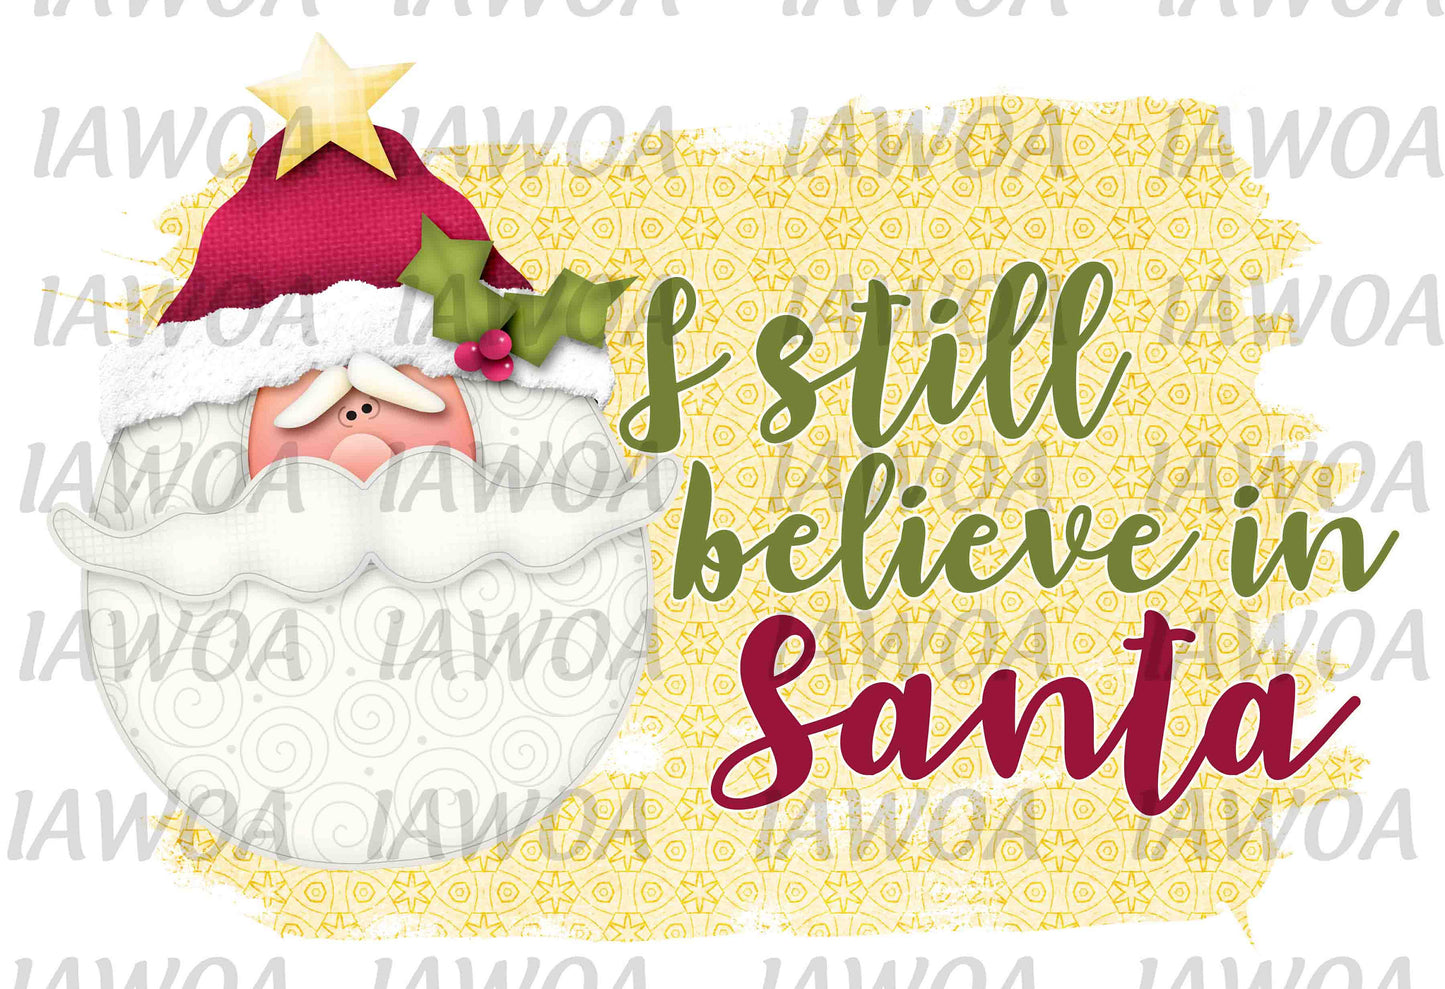 Christmas 328 - I still believe in Santa Claus Reindeer Christmas Season - Sublimation Transfer Set/Ready To Press Sublimation Transfer